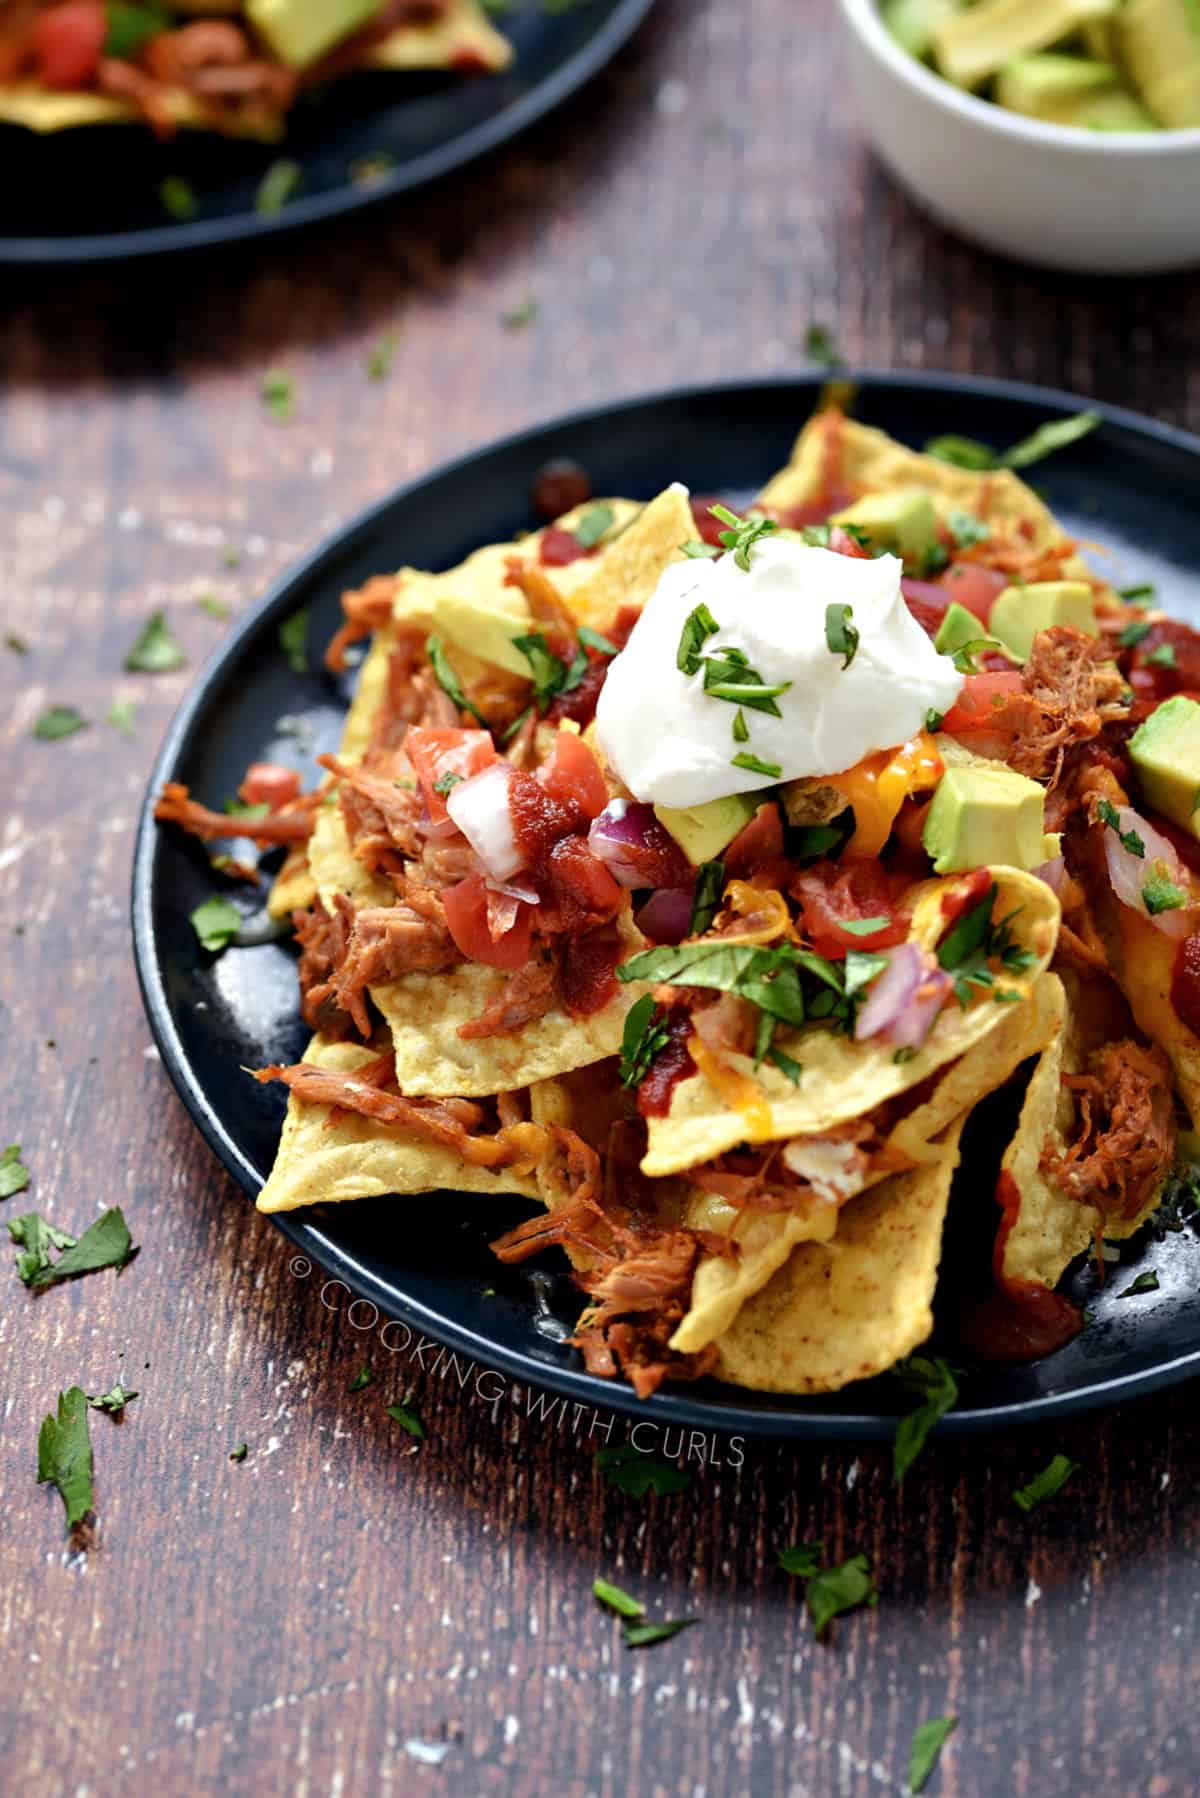 Tortilla chips, melted cheese, pulled pork, pico de gallo, avocado chunks, sour cream and cilantro piled up on a blue plate.